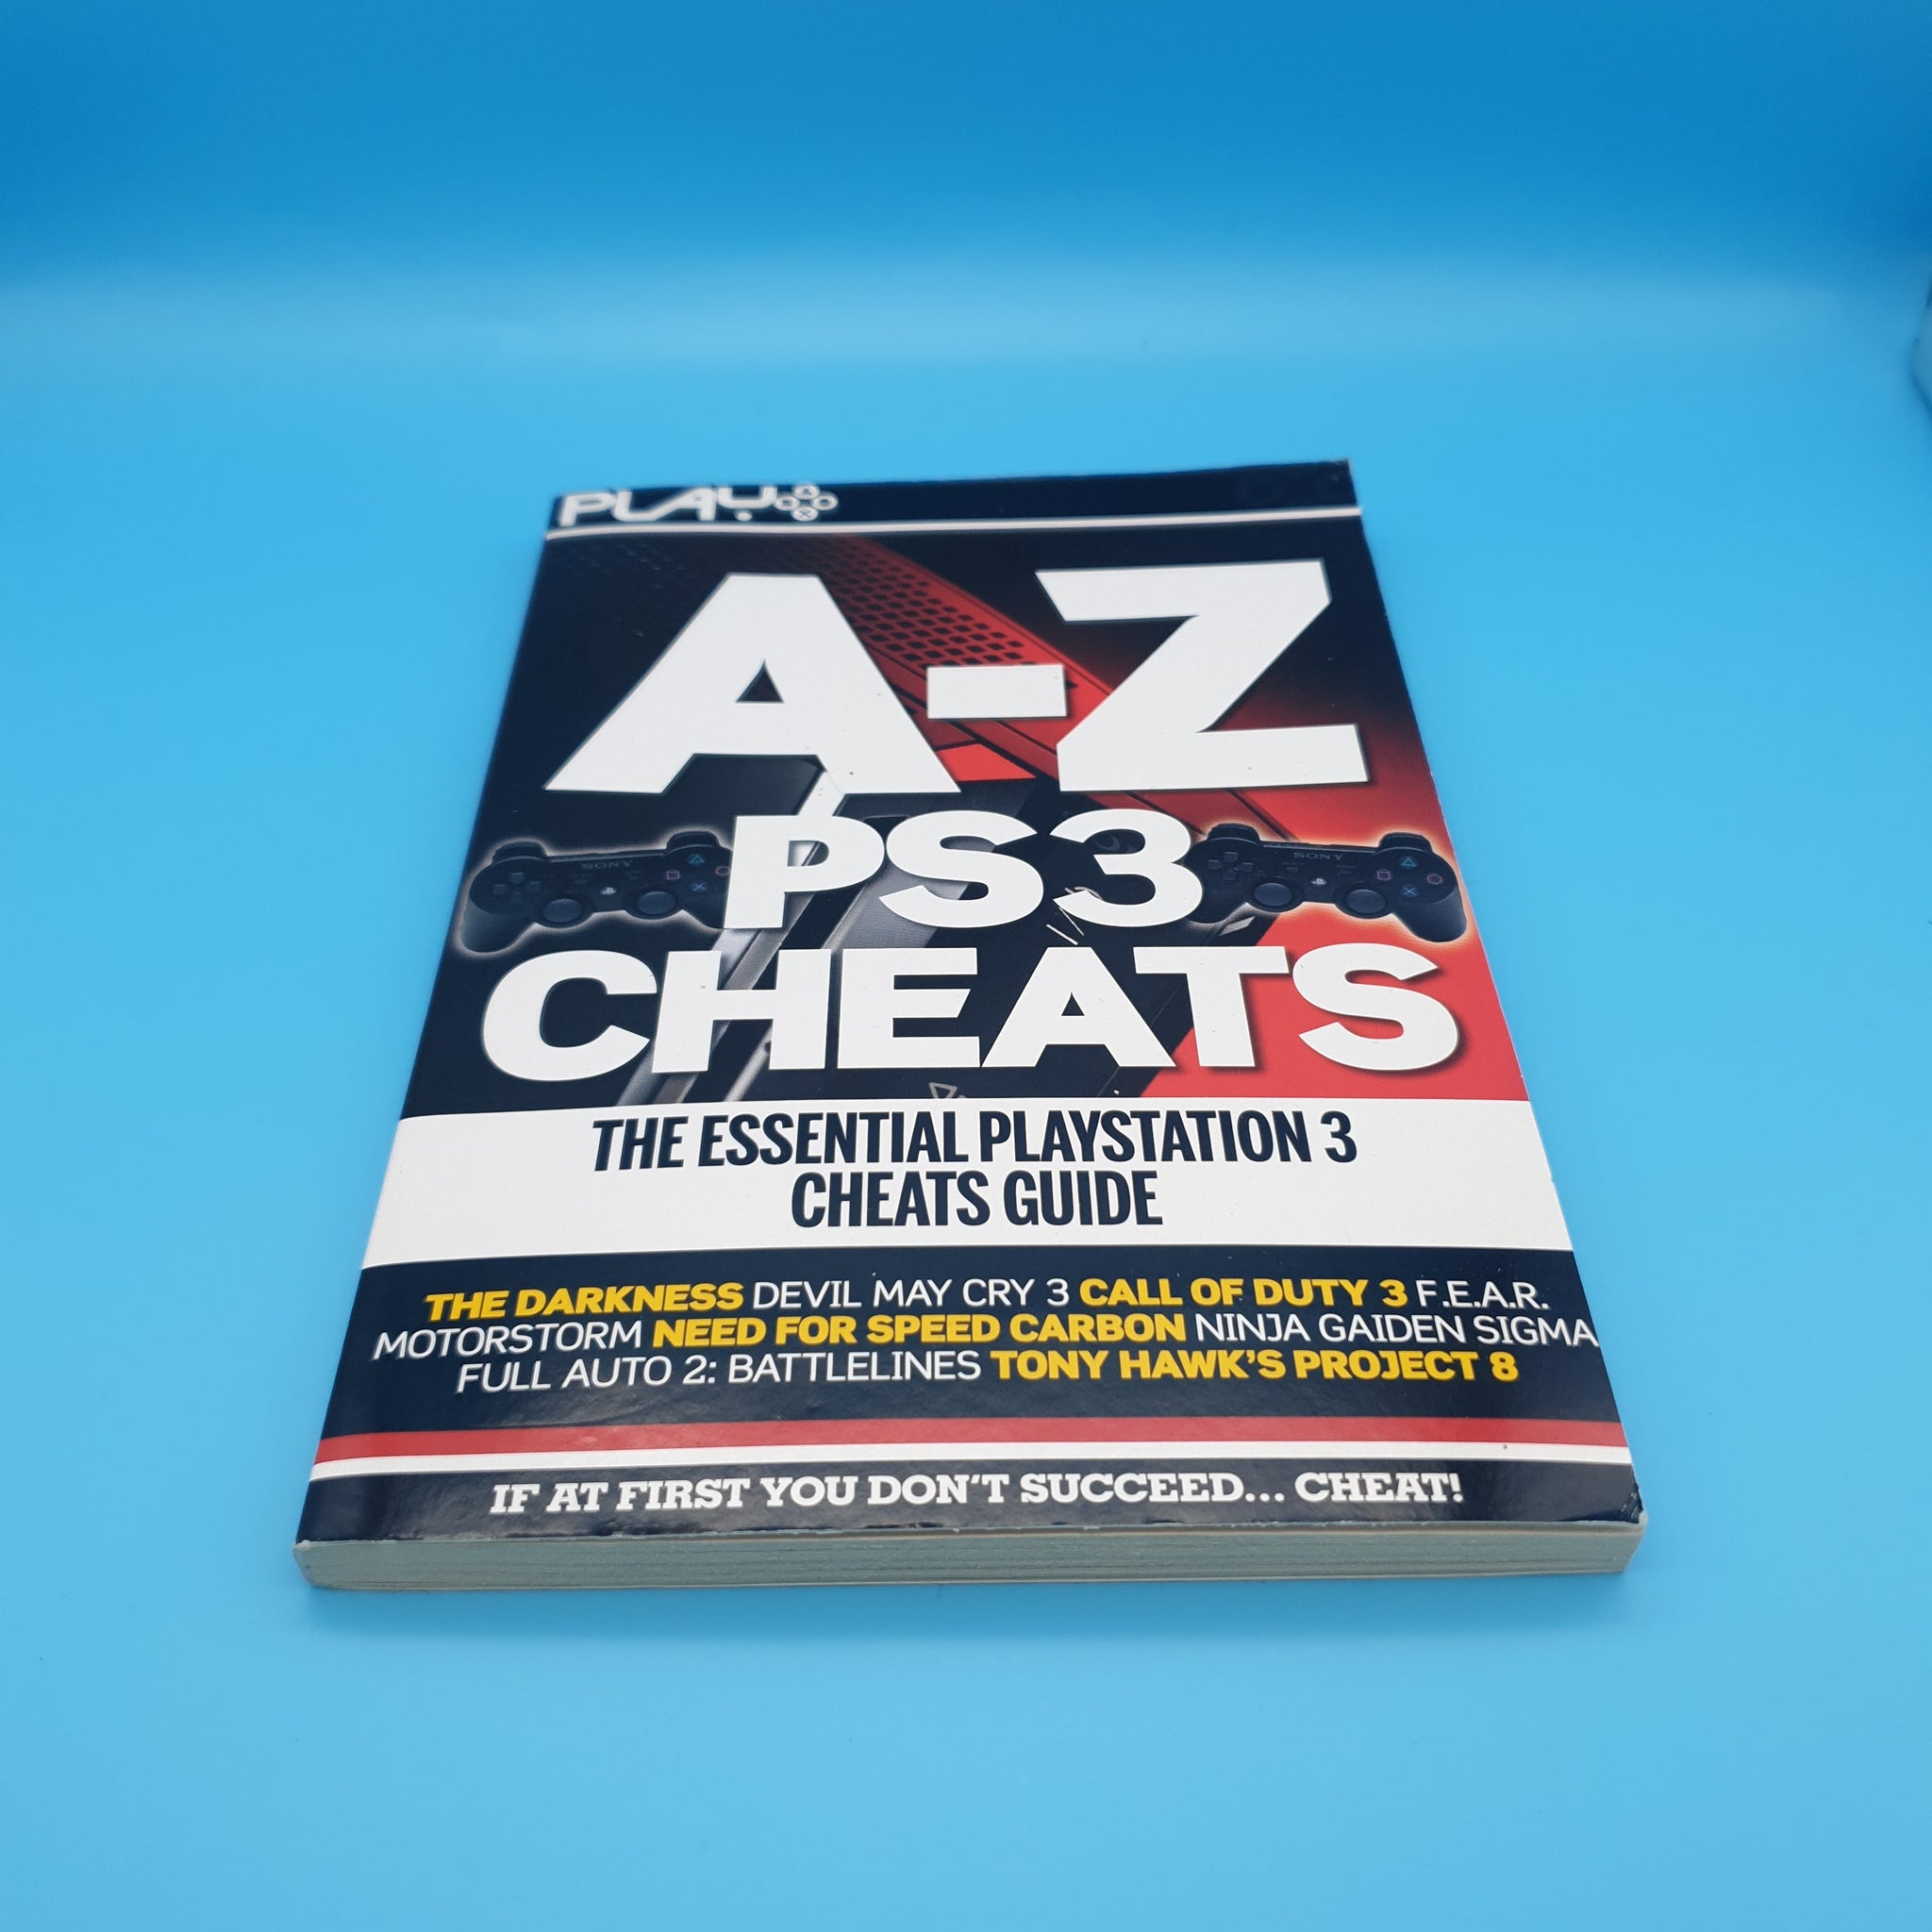 A-Z PS3 CHEATS GUIDE